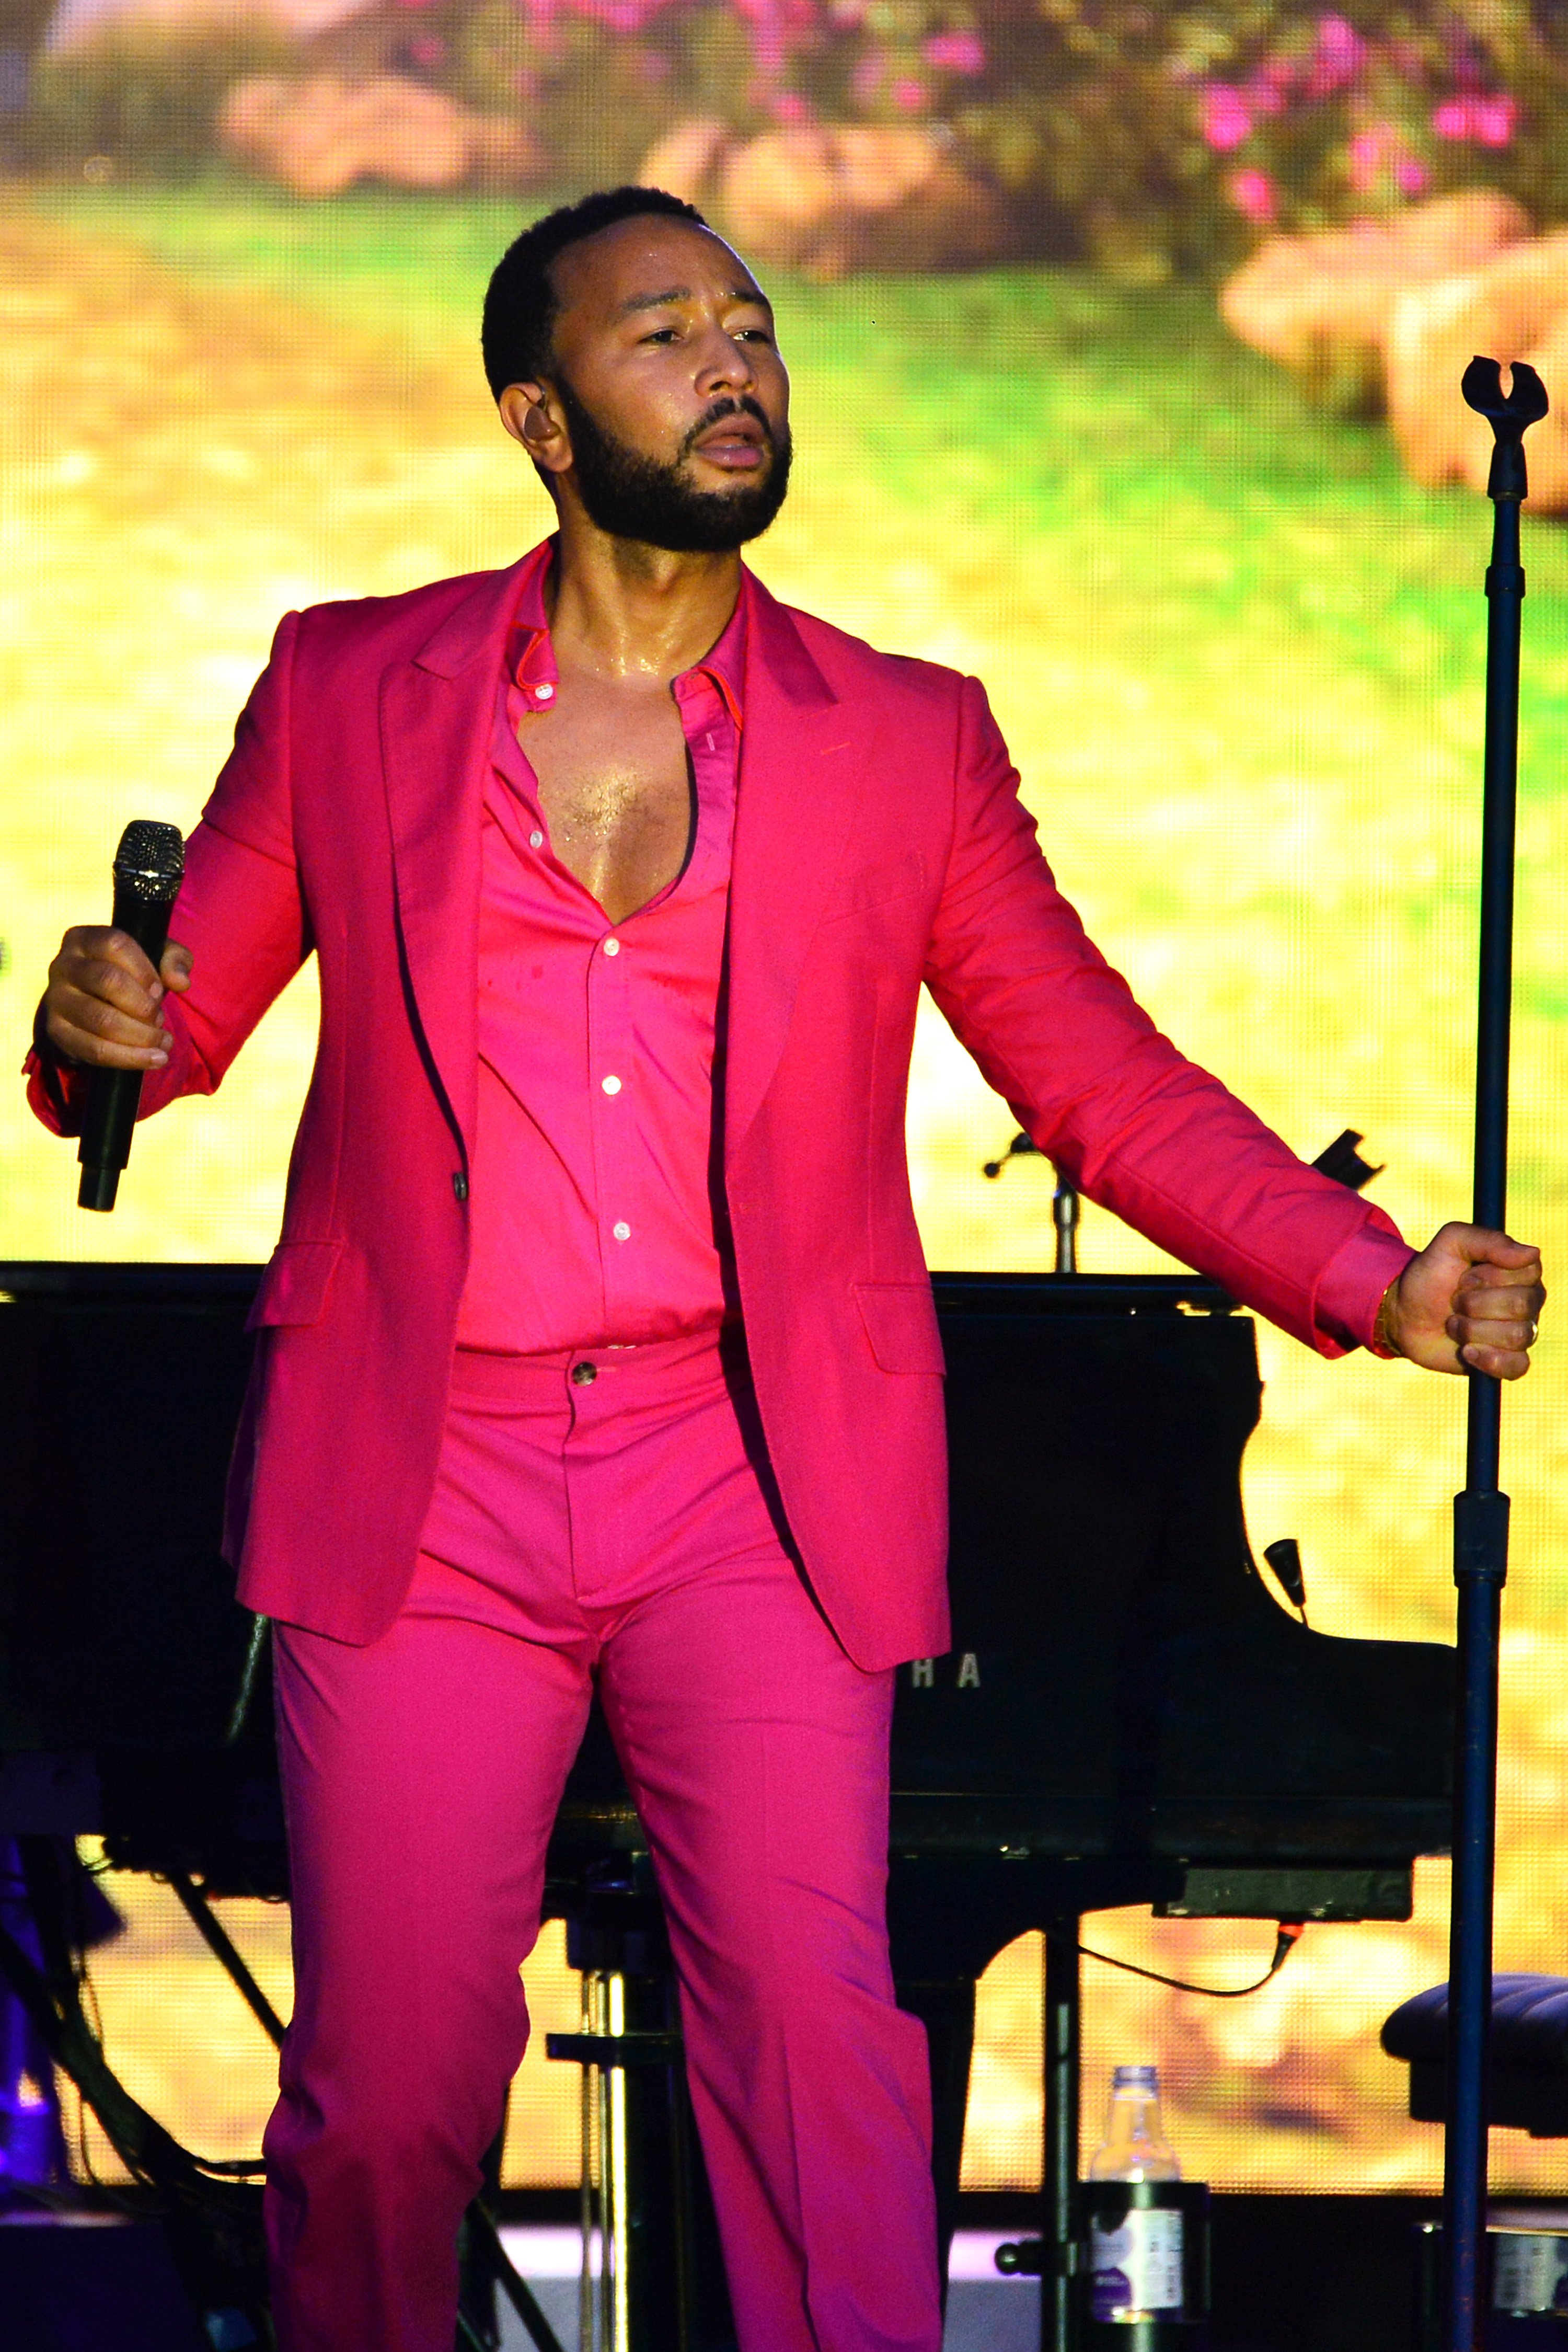  John Legend performs at the Somerset House Summer Series at Somerset House | Source: Getty Images